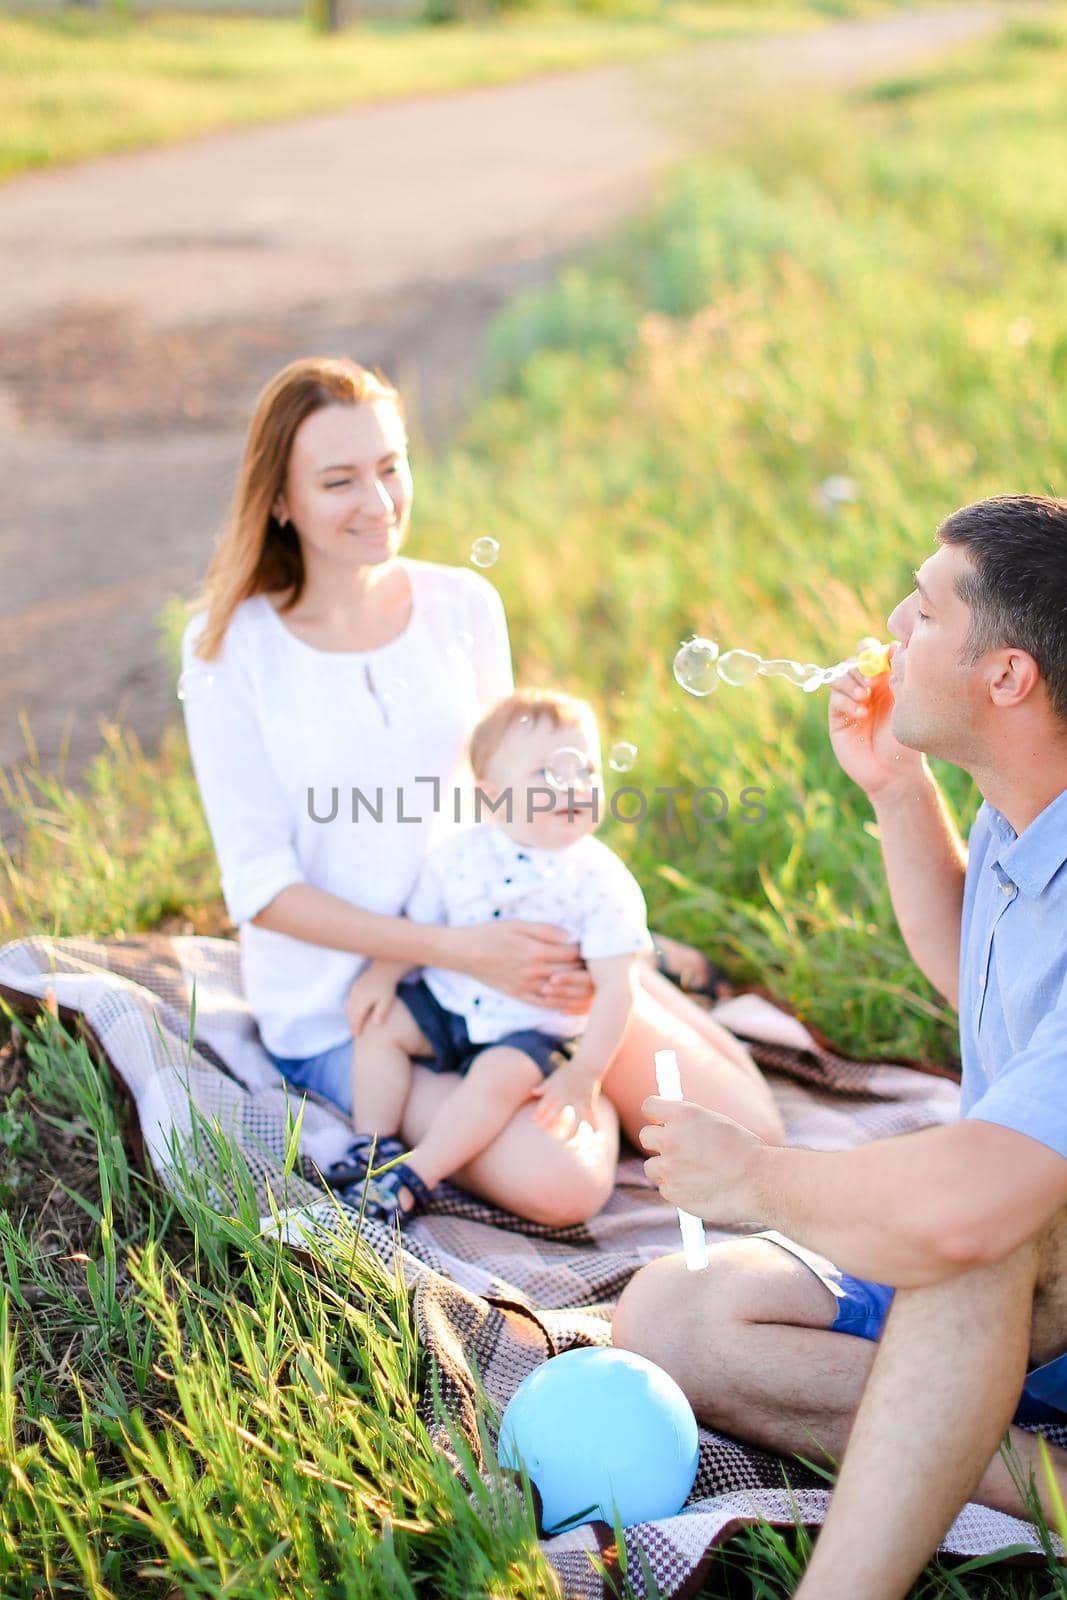 Young european mother and father sittling on grass with little baby and blowing bubbles. Concept of picnic and children, parenthood and leisure time.